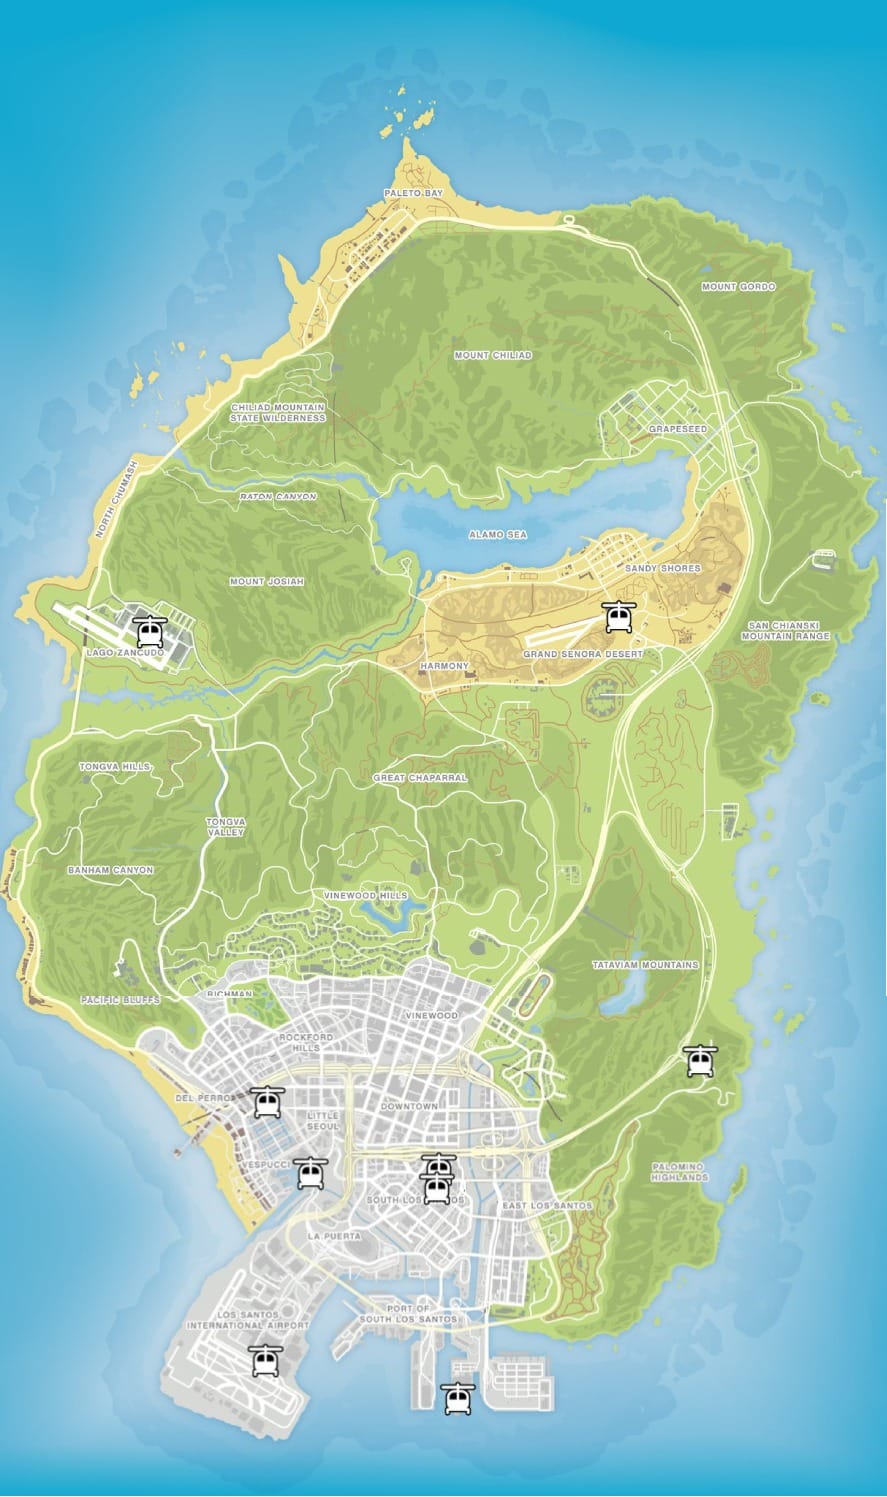 gta 5 helicopter locations story mode